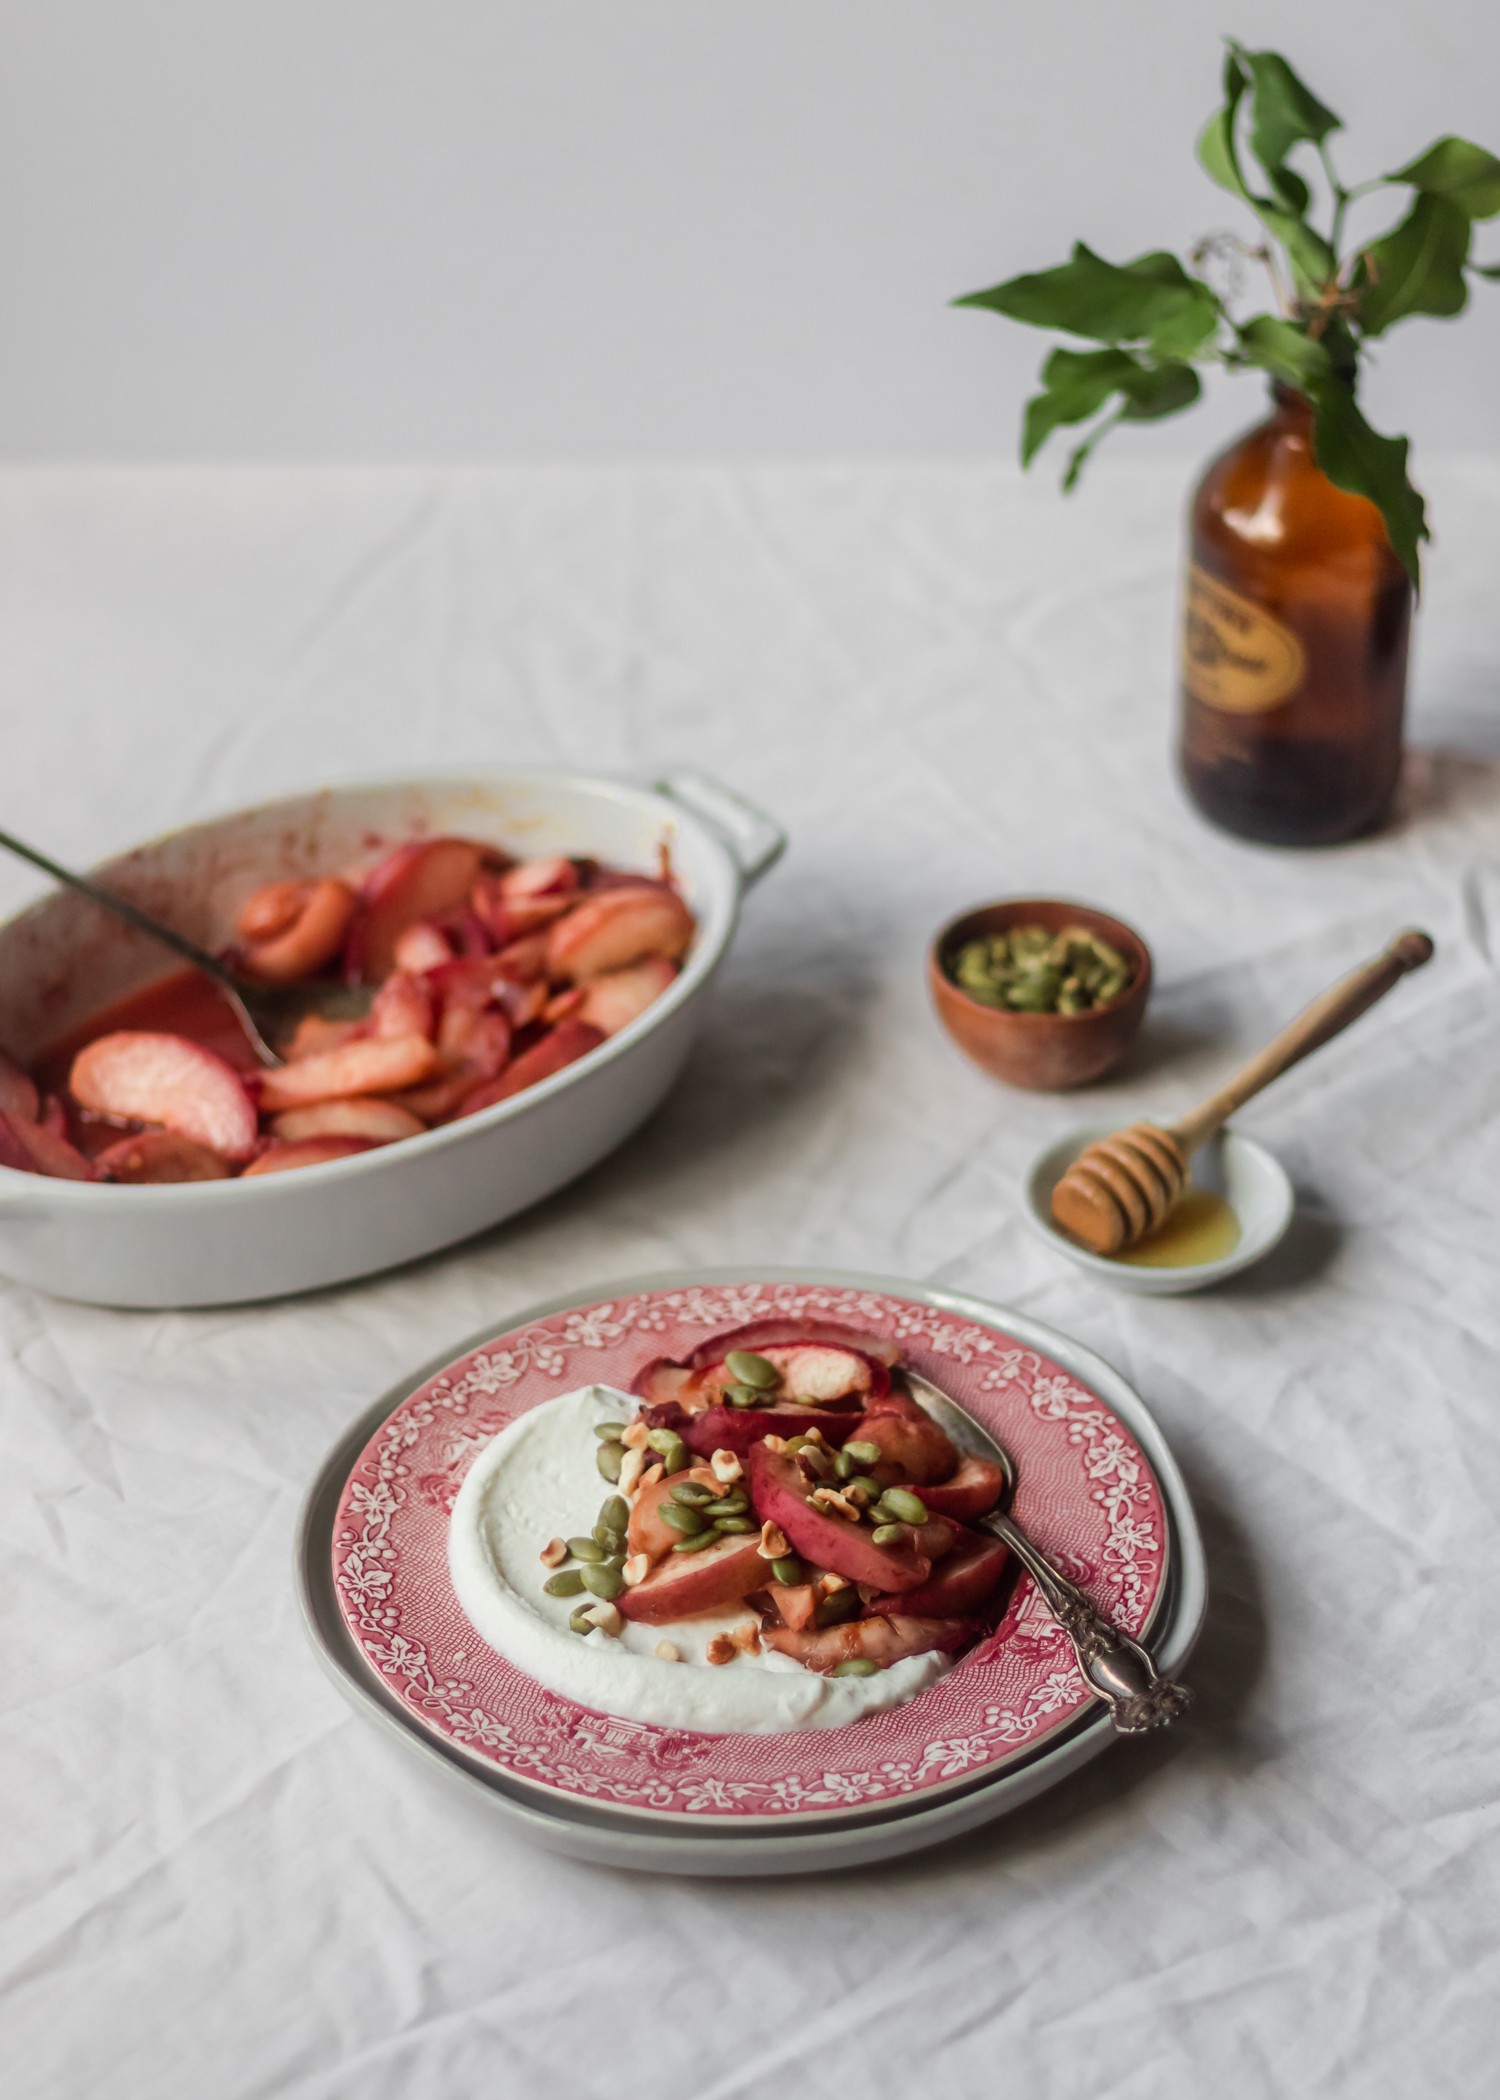 A side view of a red plate with roasted peaches on a white table cloth, with a roasting pan, honey, pumpkin seeds, and a jar of greenery in the background.